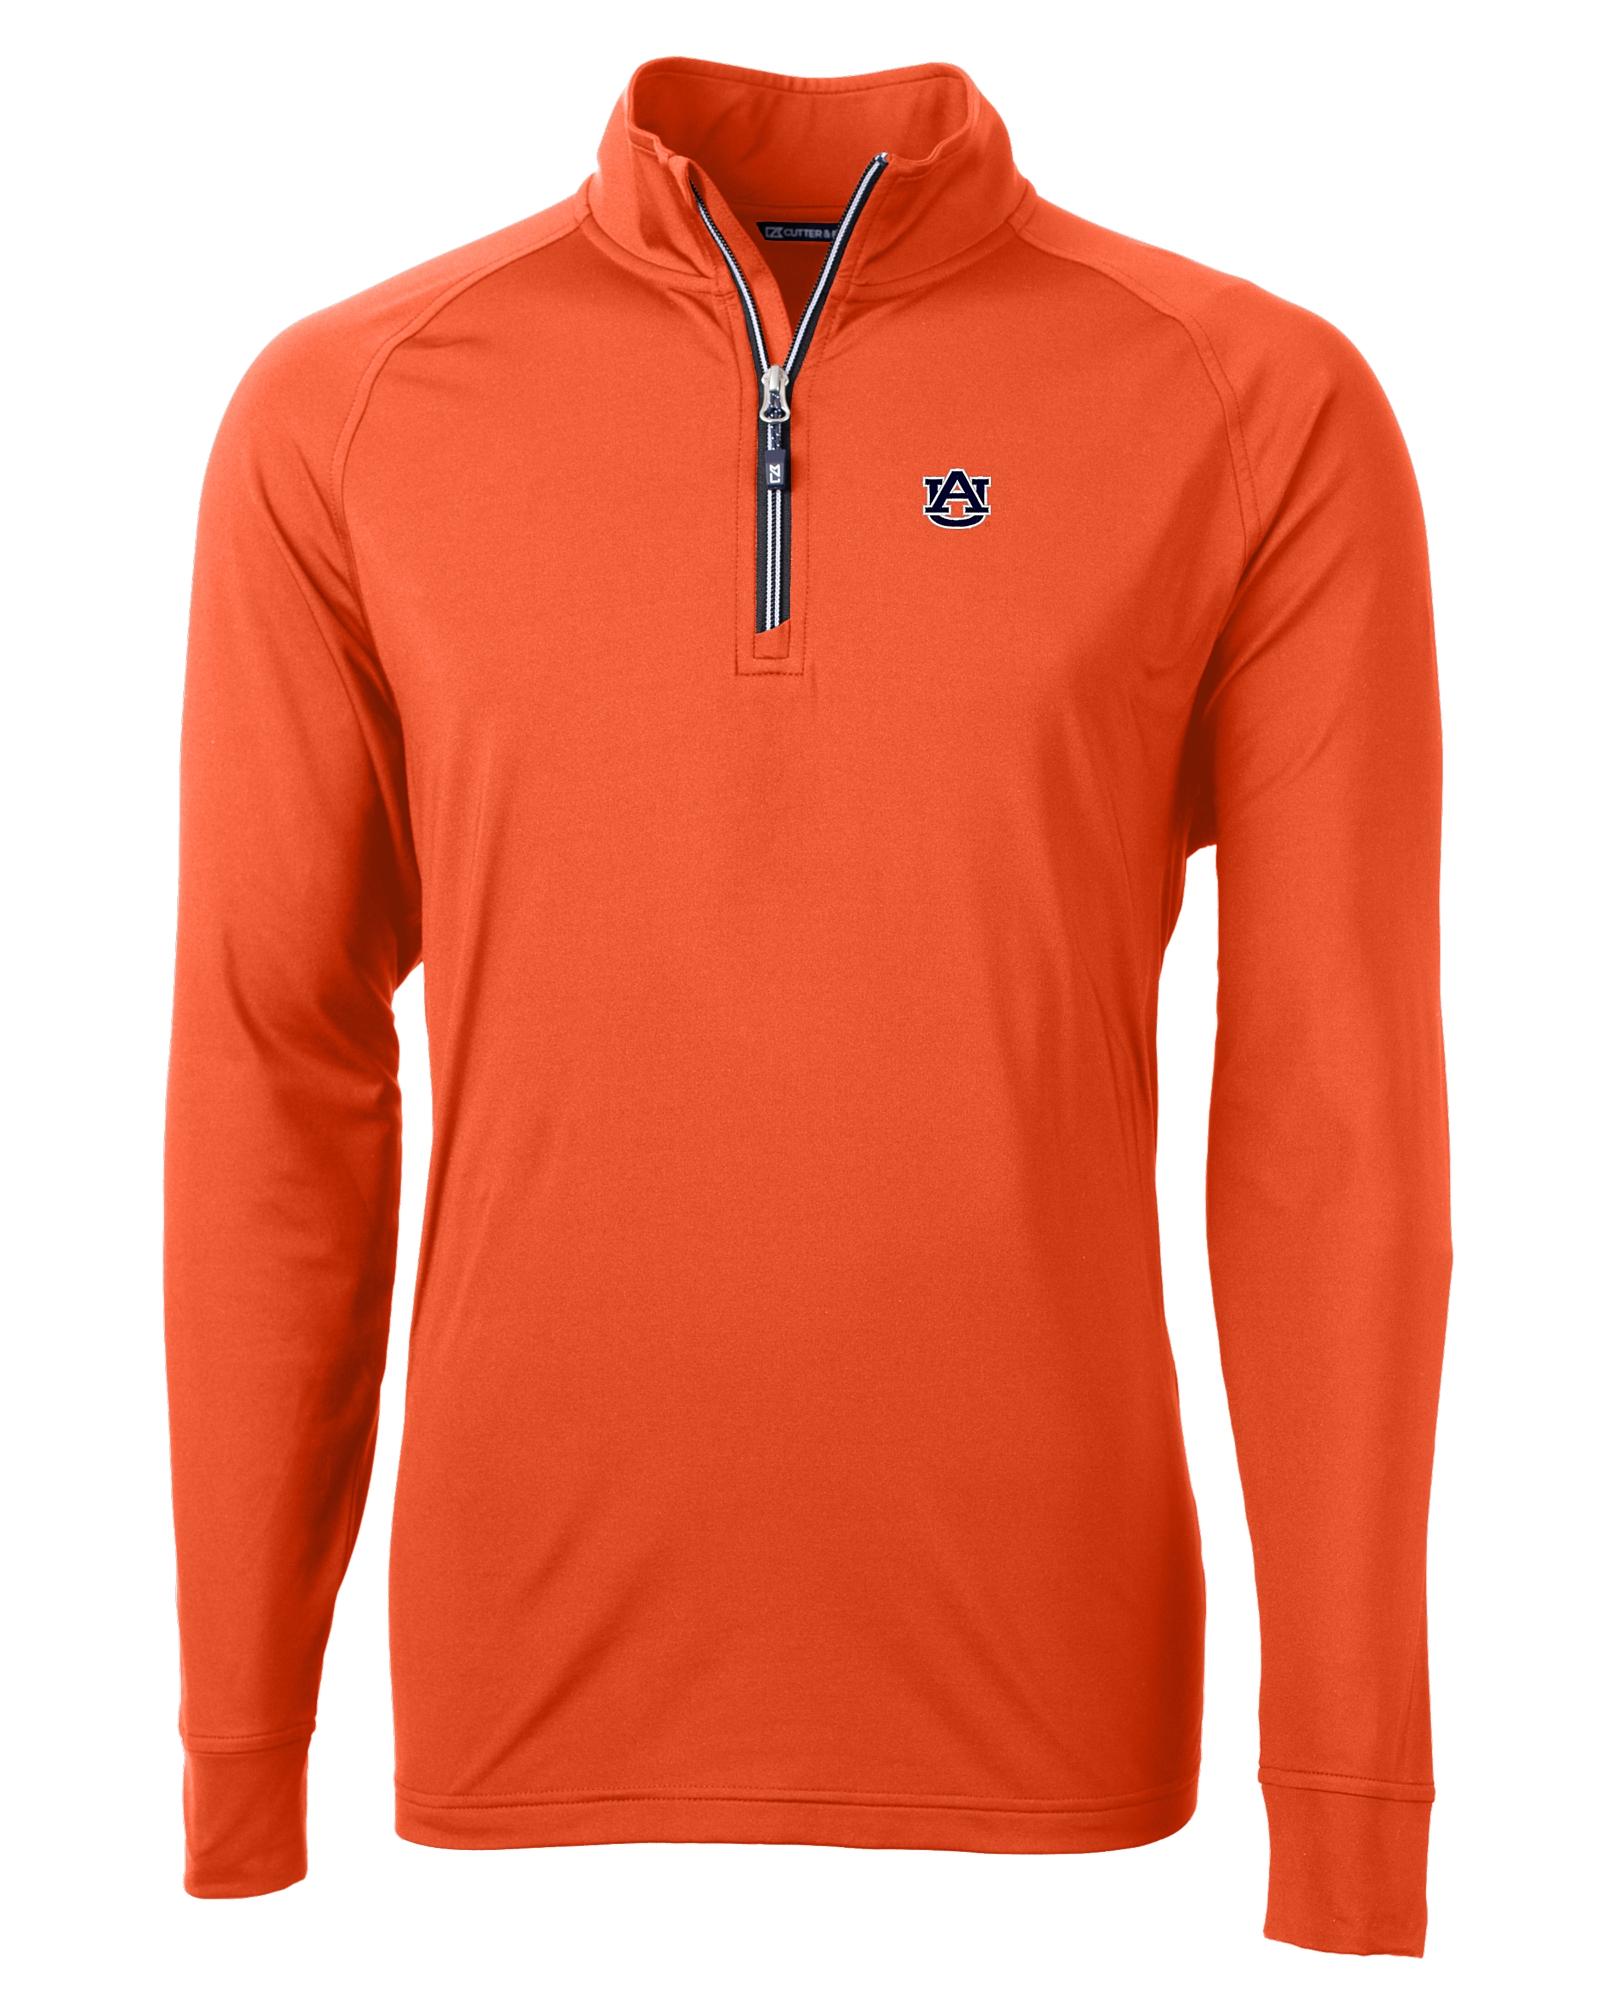 Cutter & Buck Named Top Licensee for Auburn University Apparel